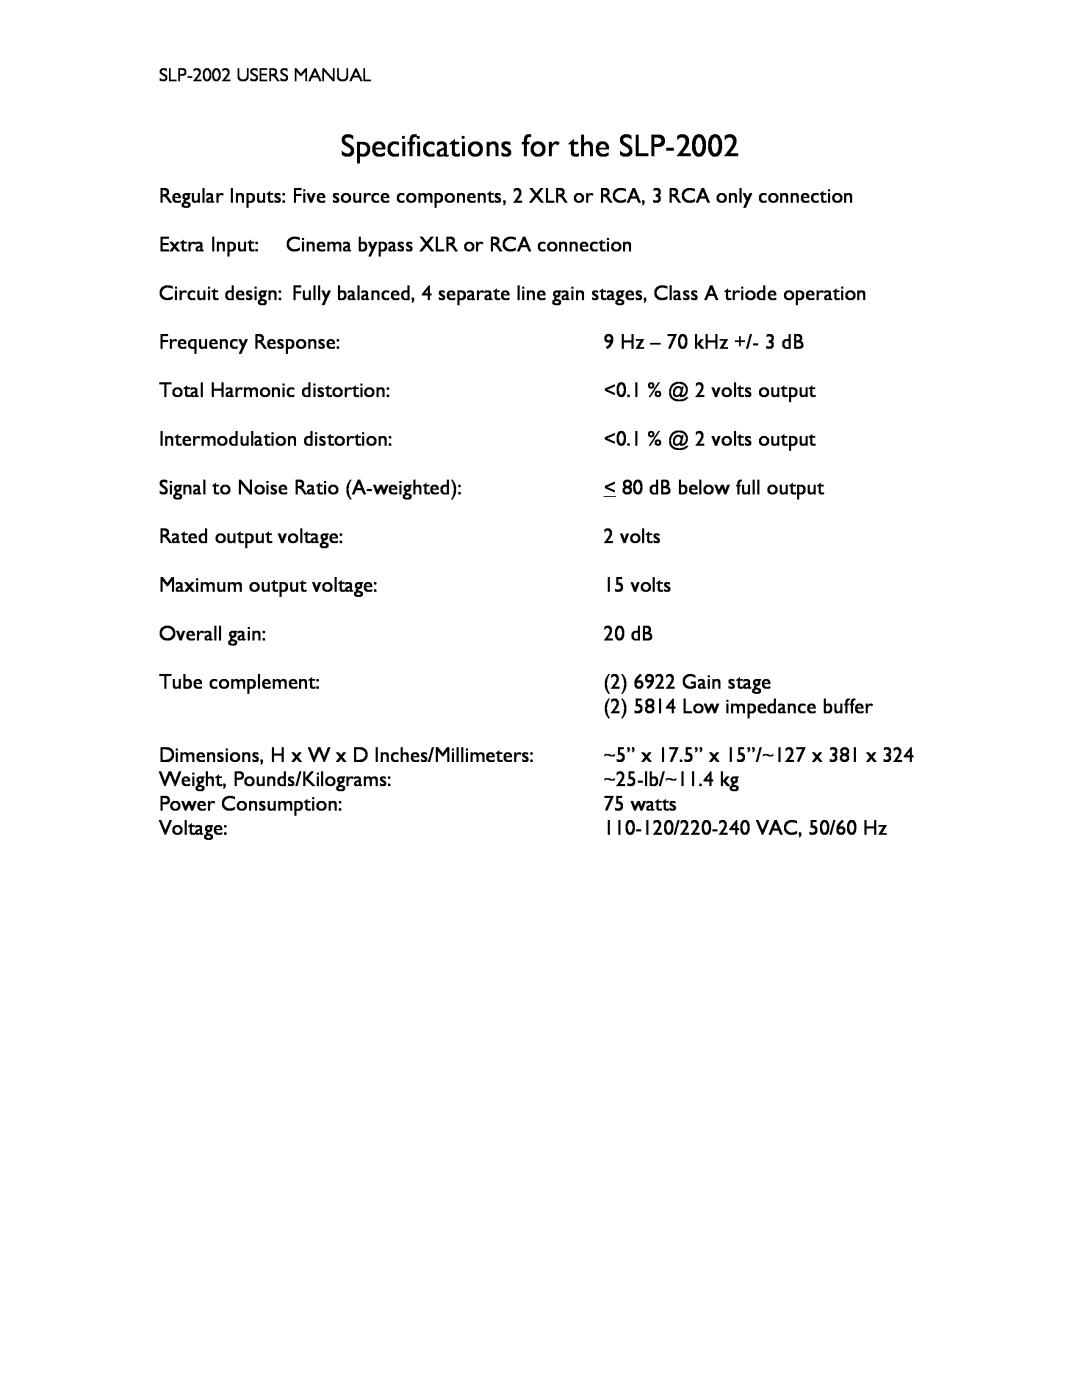 Cary Audio Design user manual Specifications for the SLP-2002 